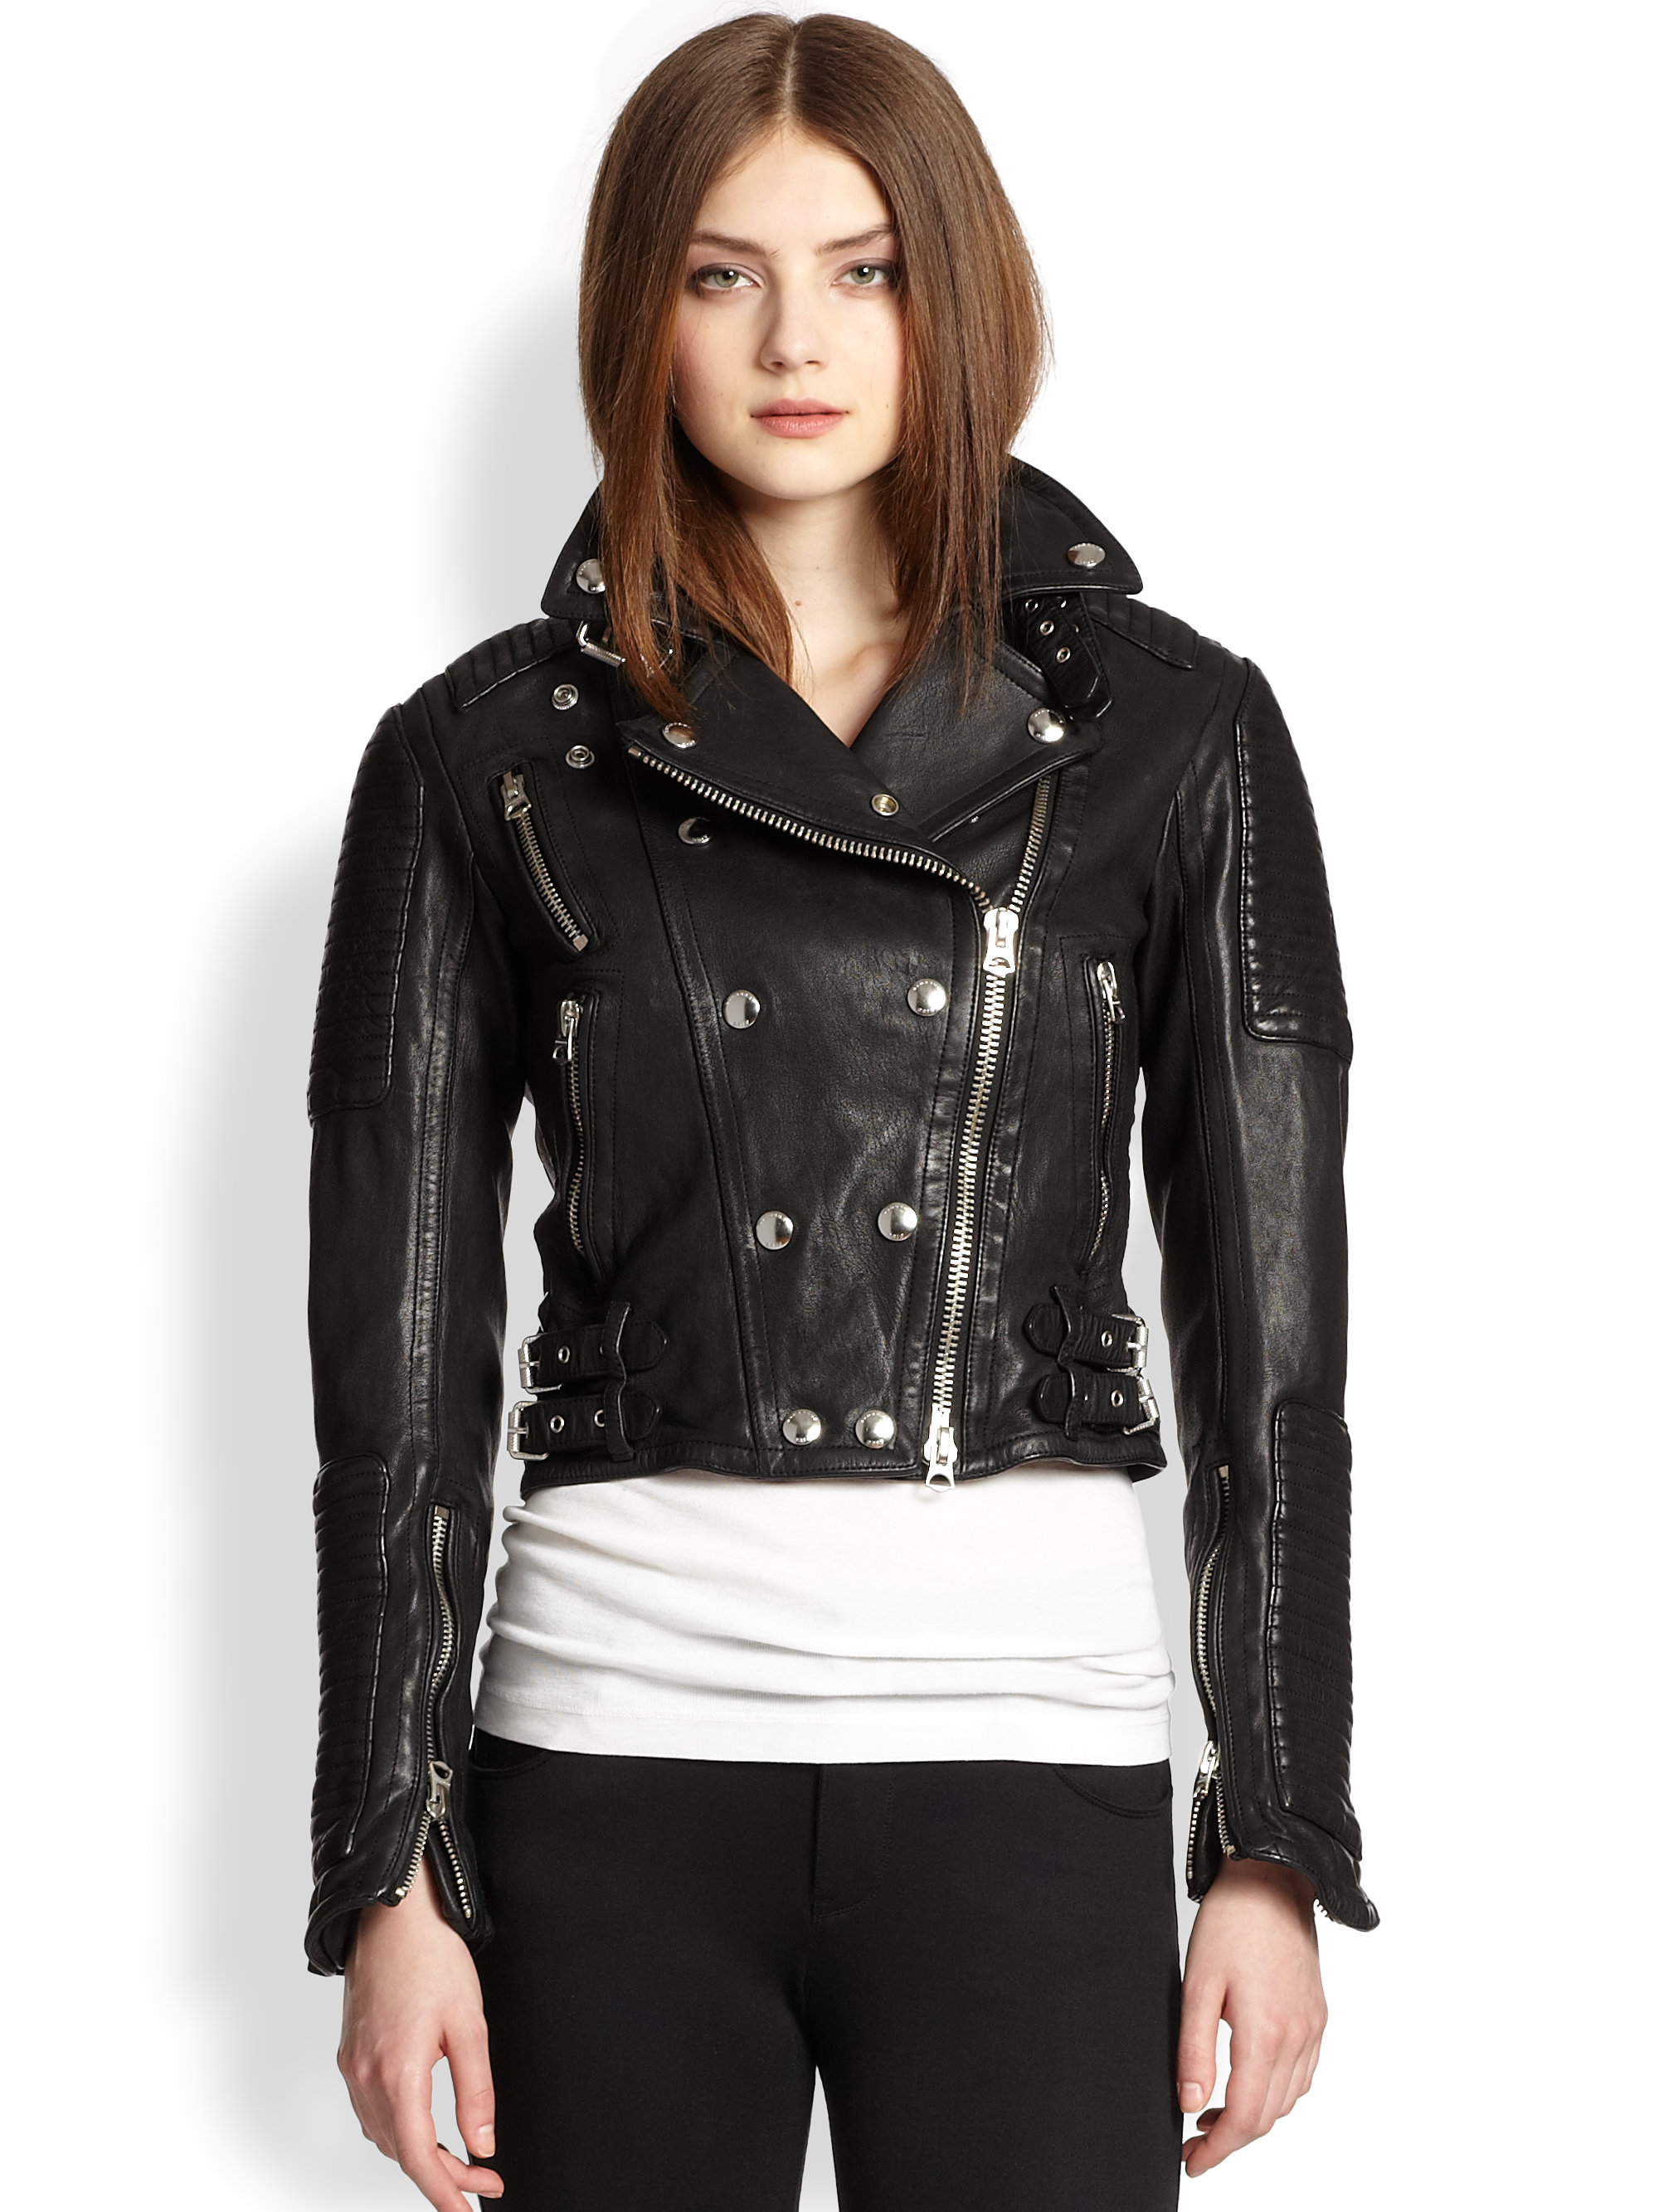 Burberry Brit Loseley Cropped Leather Jacket in Black - Lyst